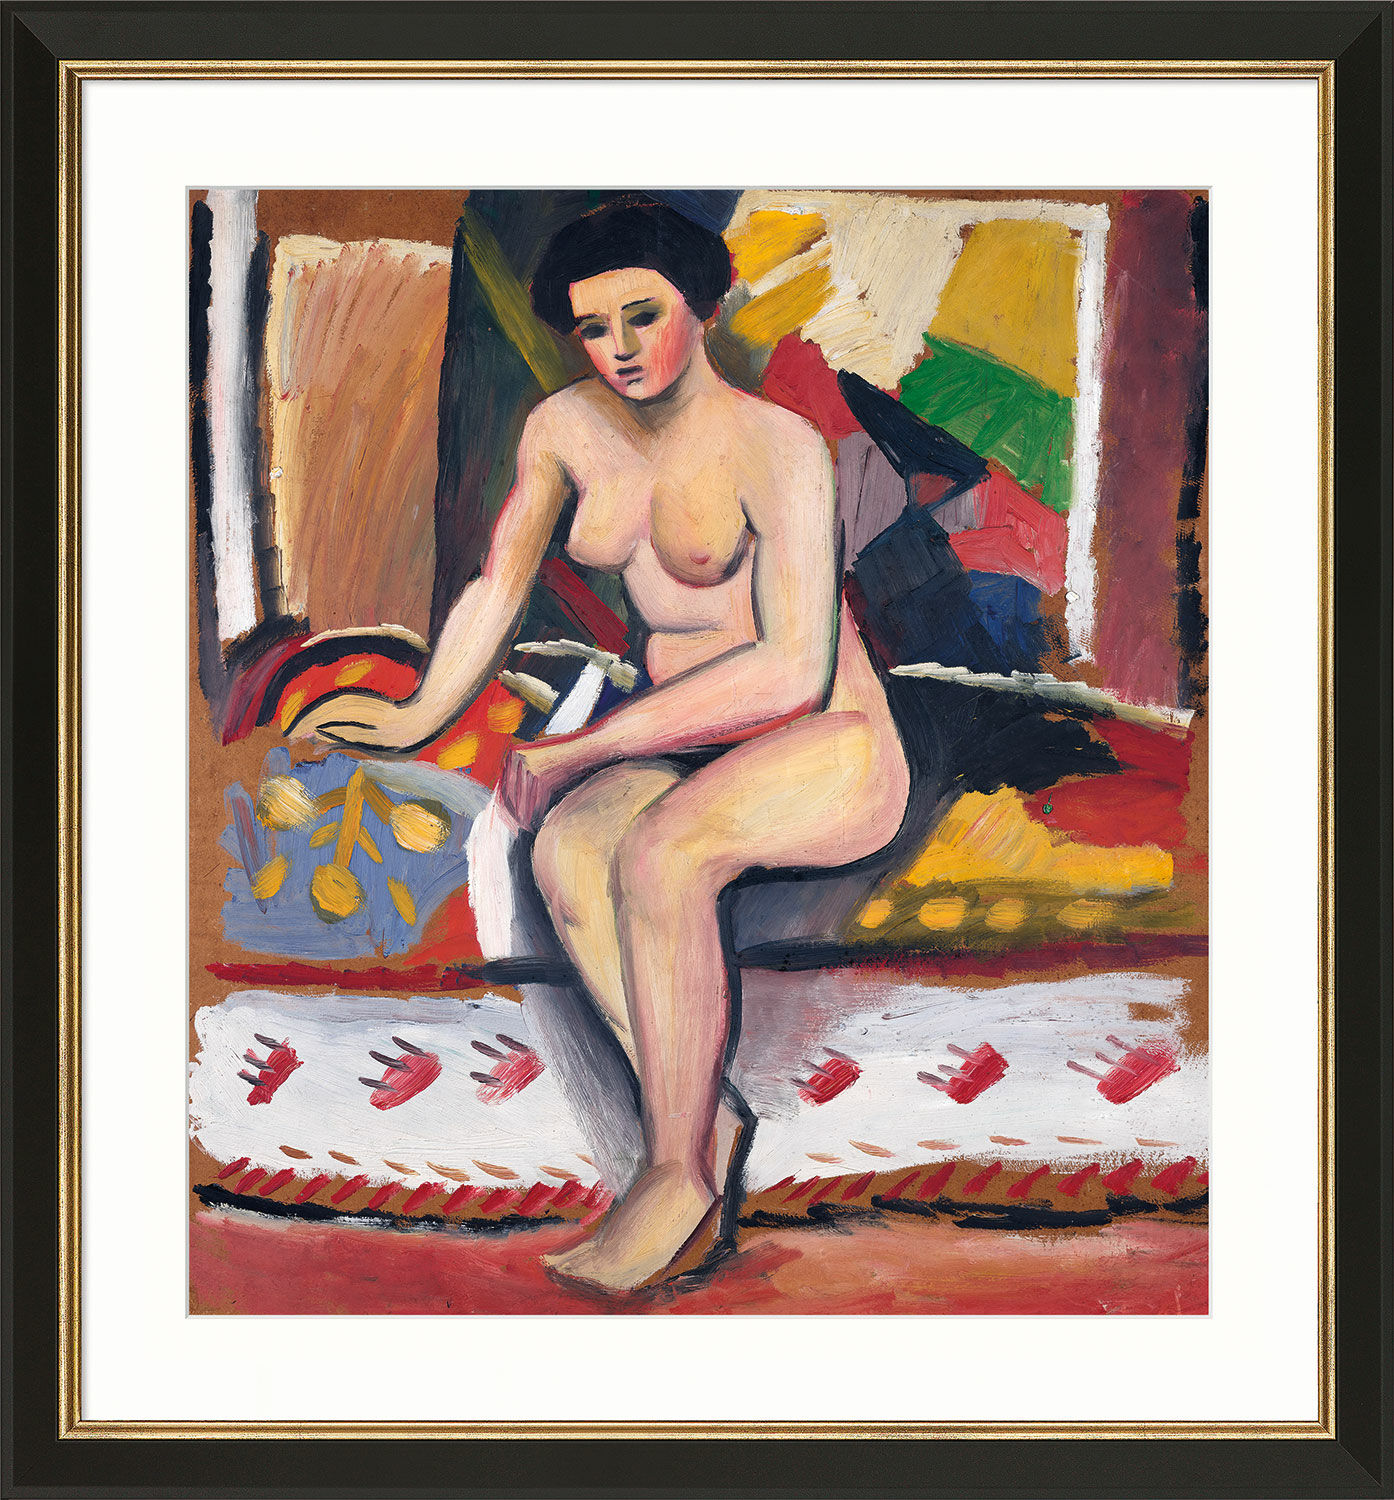 Picture "Nude" (1913), black and golden framed version by August Macke